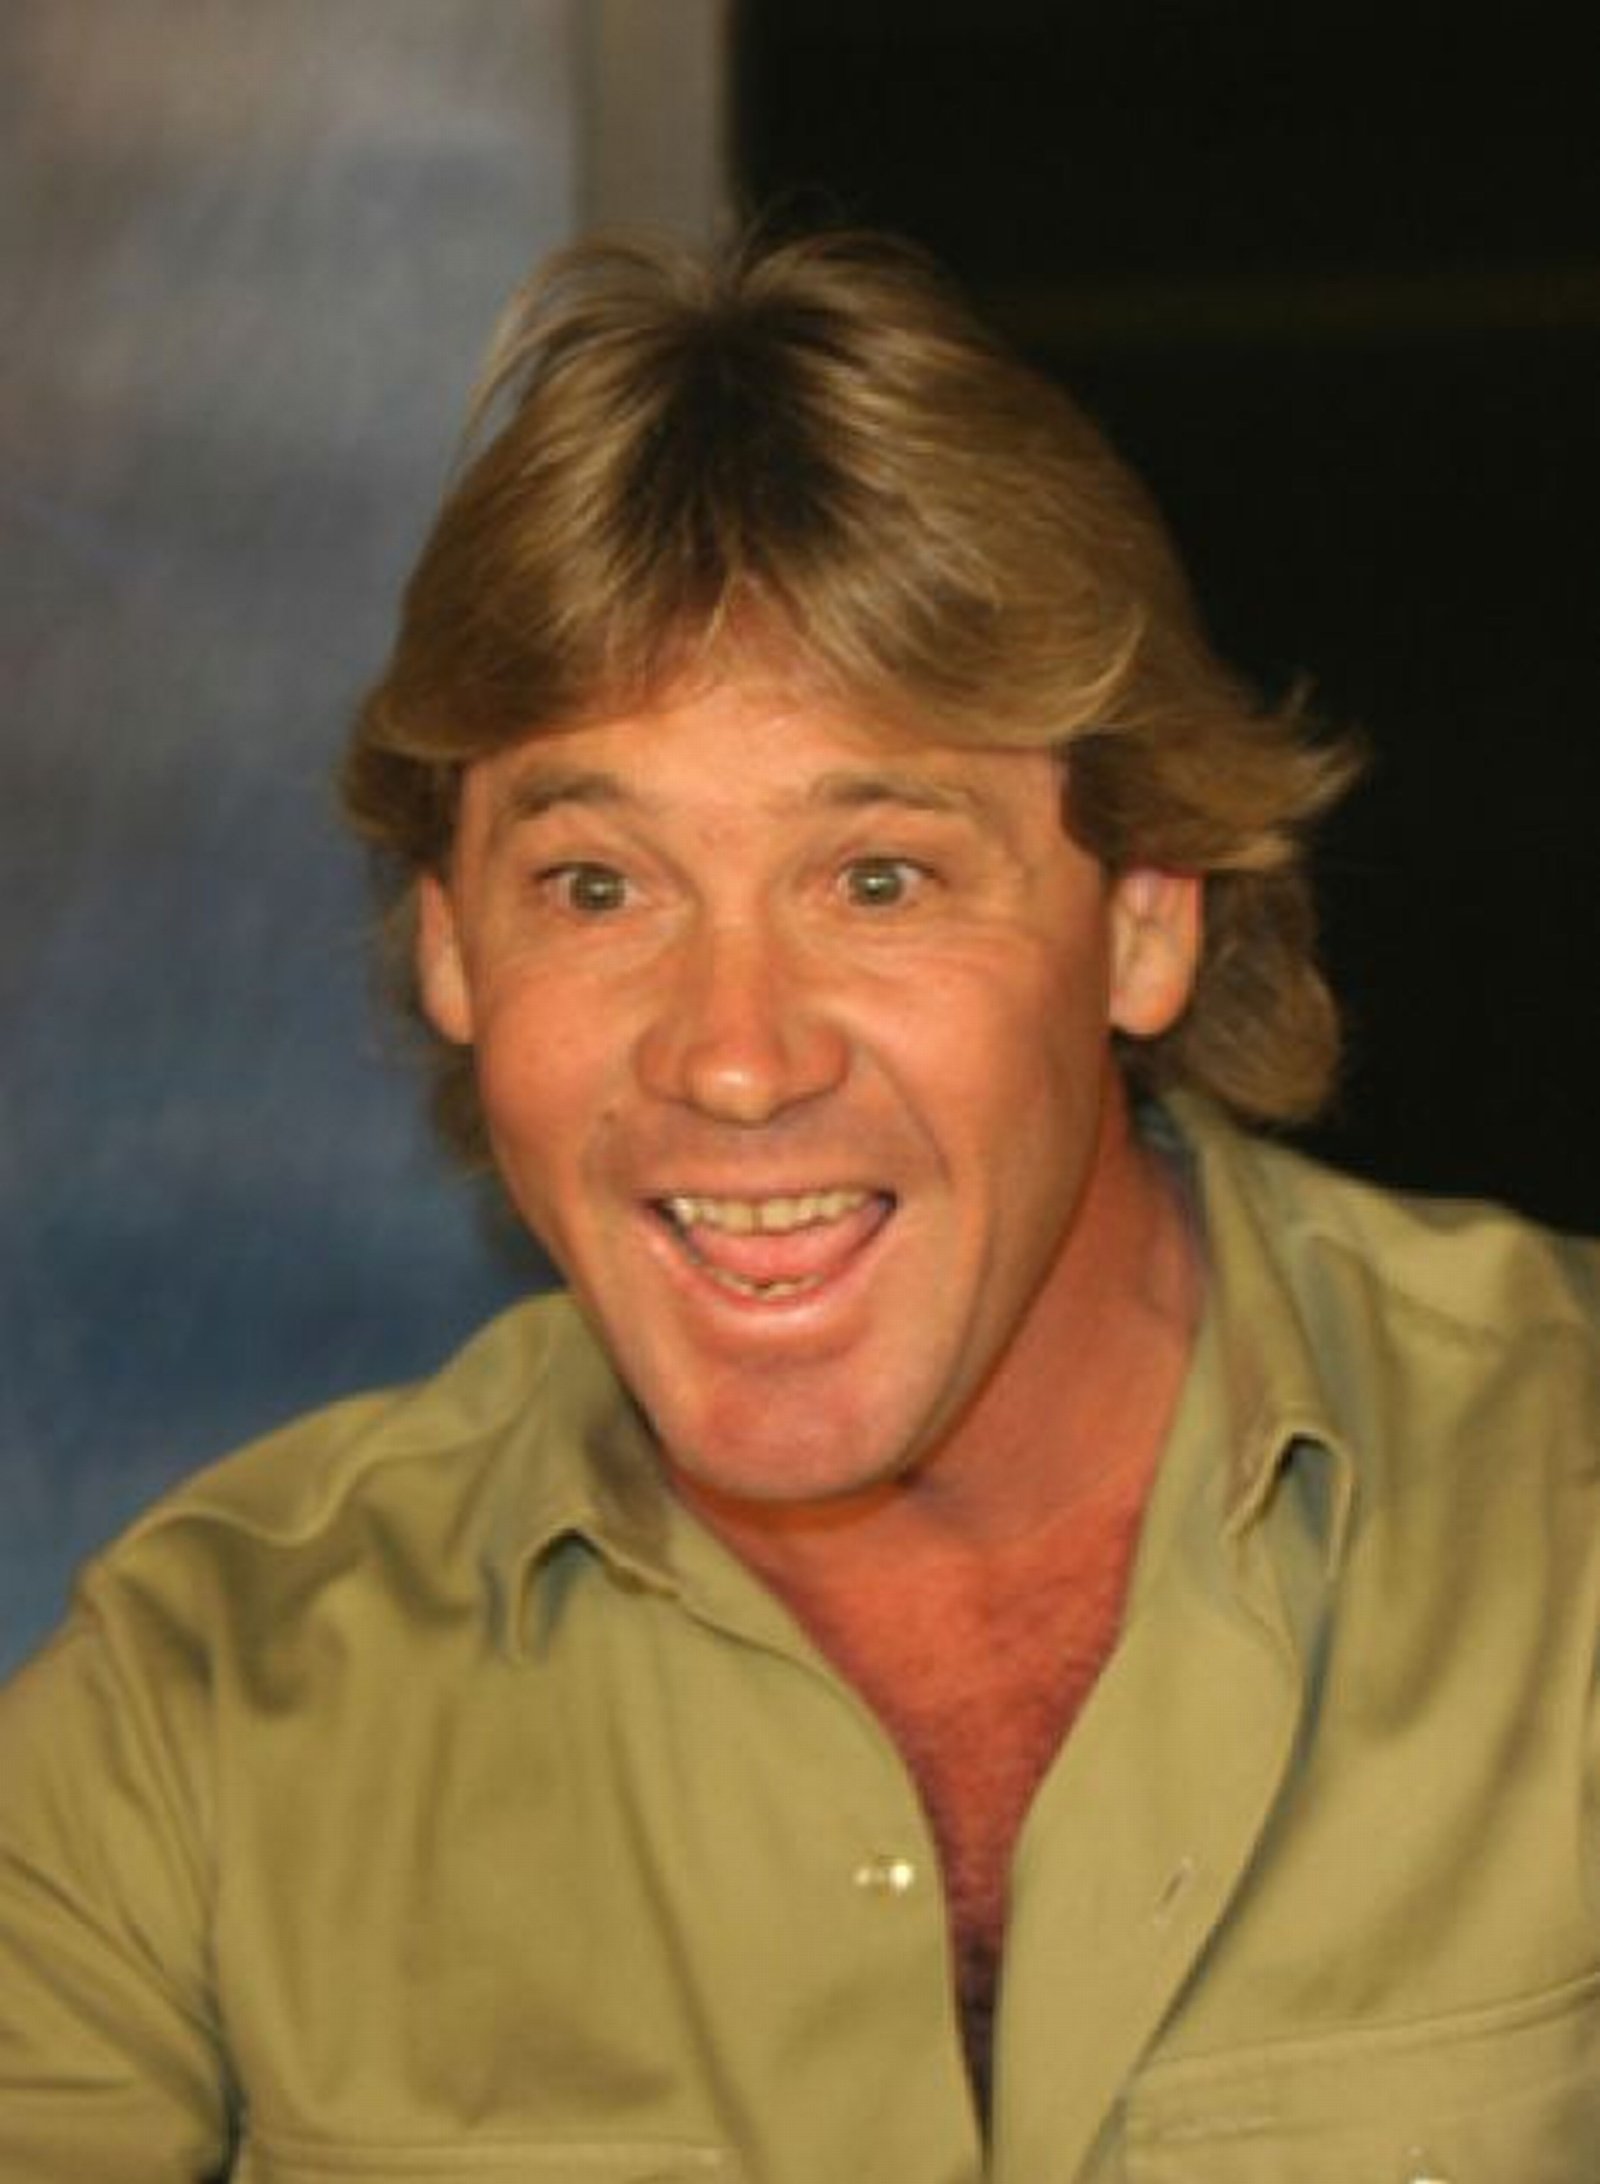 Amazing Steve Irwin Pictures & Backgrounds